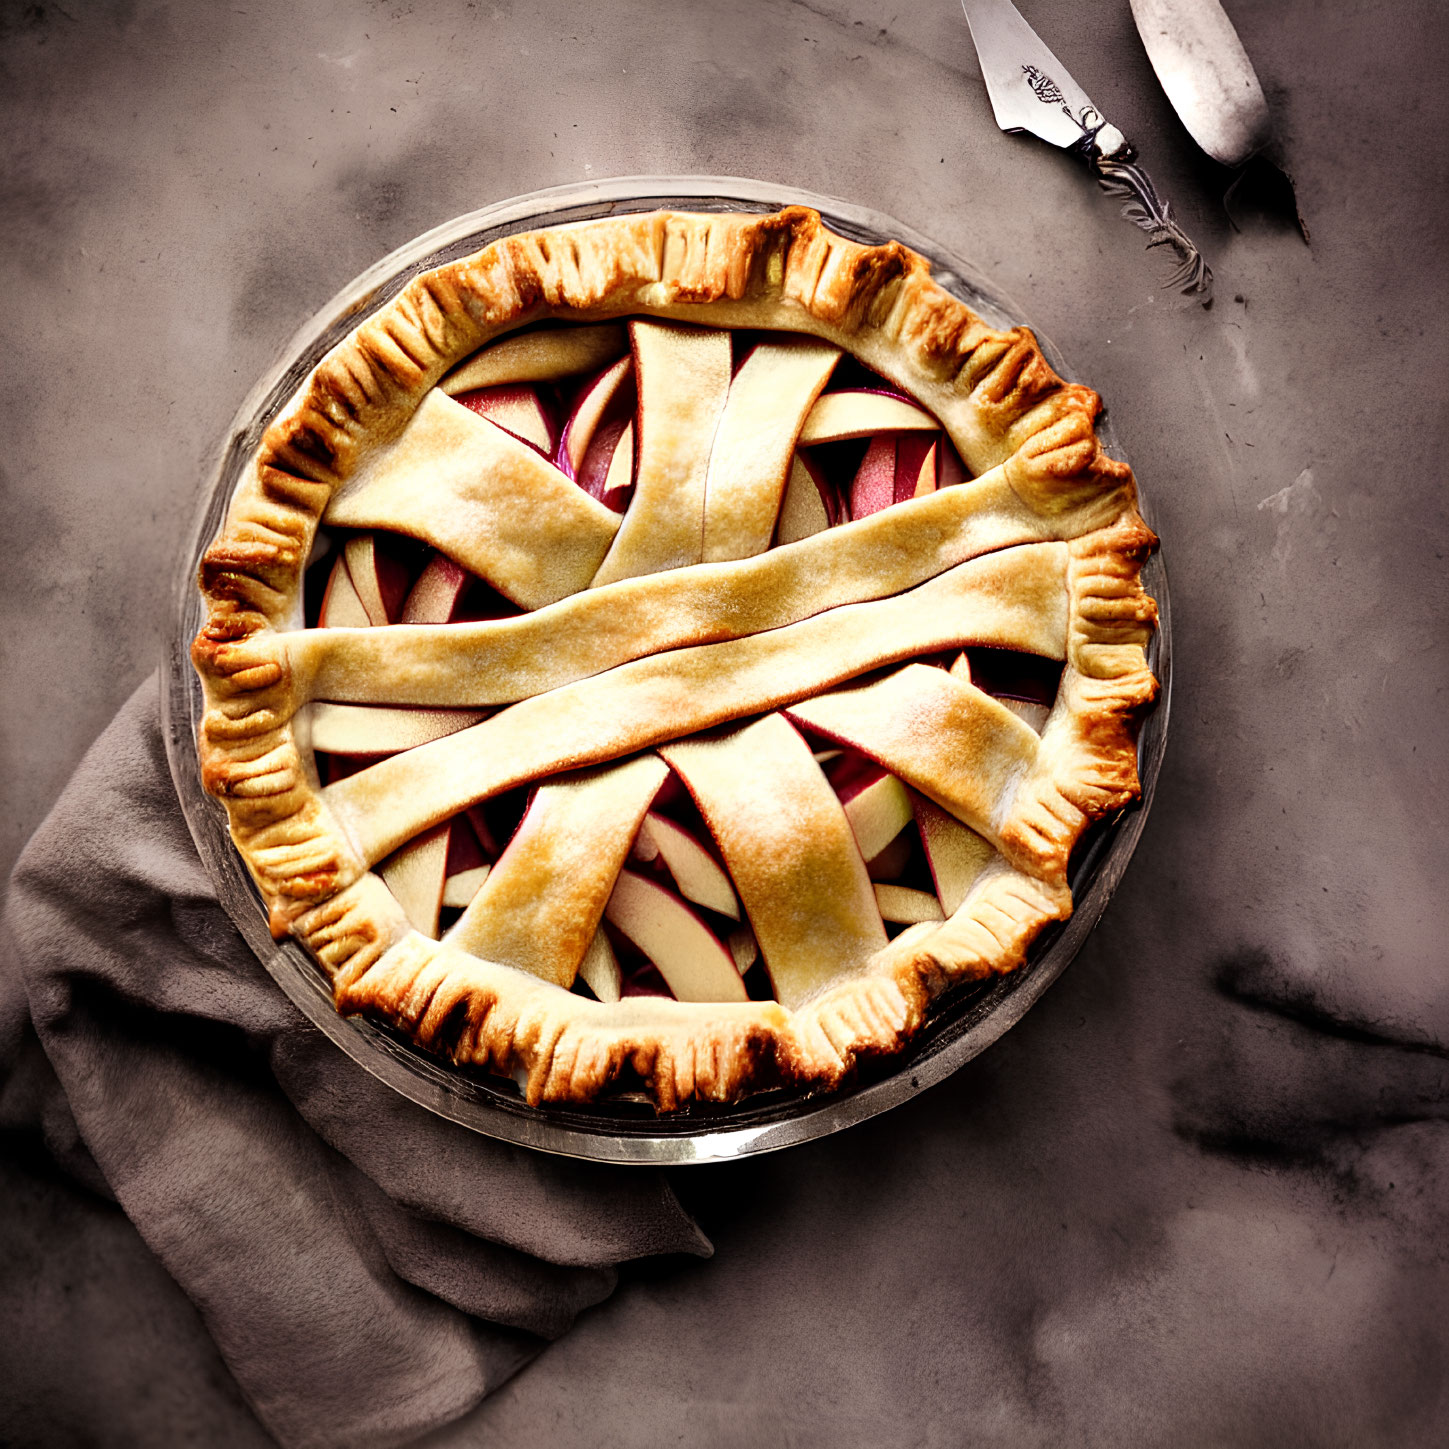 Homemade apple pie with lattice crust in glass dish on gray background